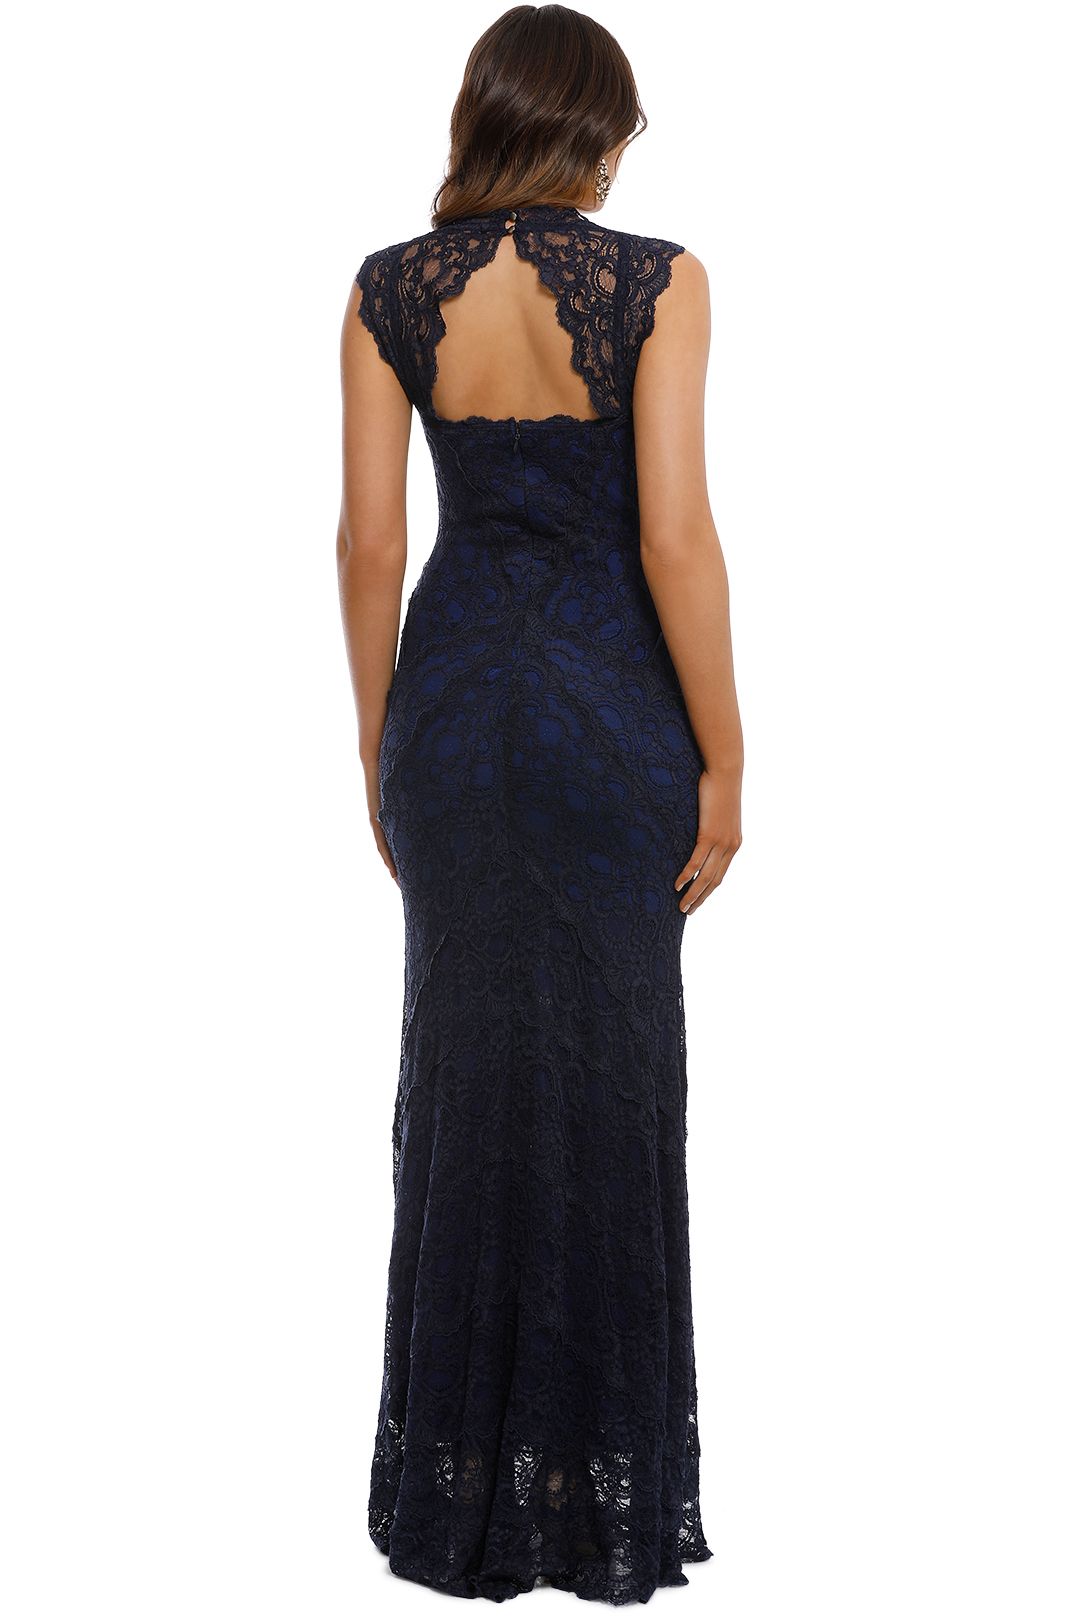 Nicole Miller - Zaria Lace Gown - Navy - Back